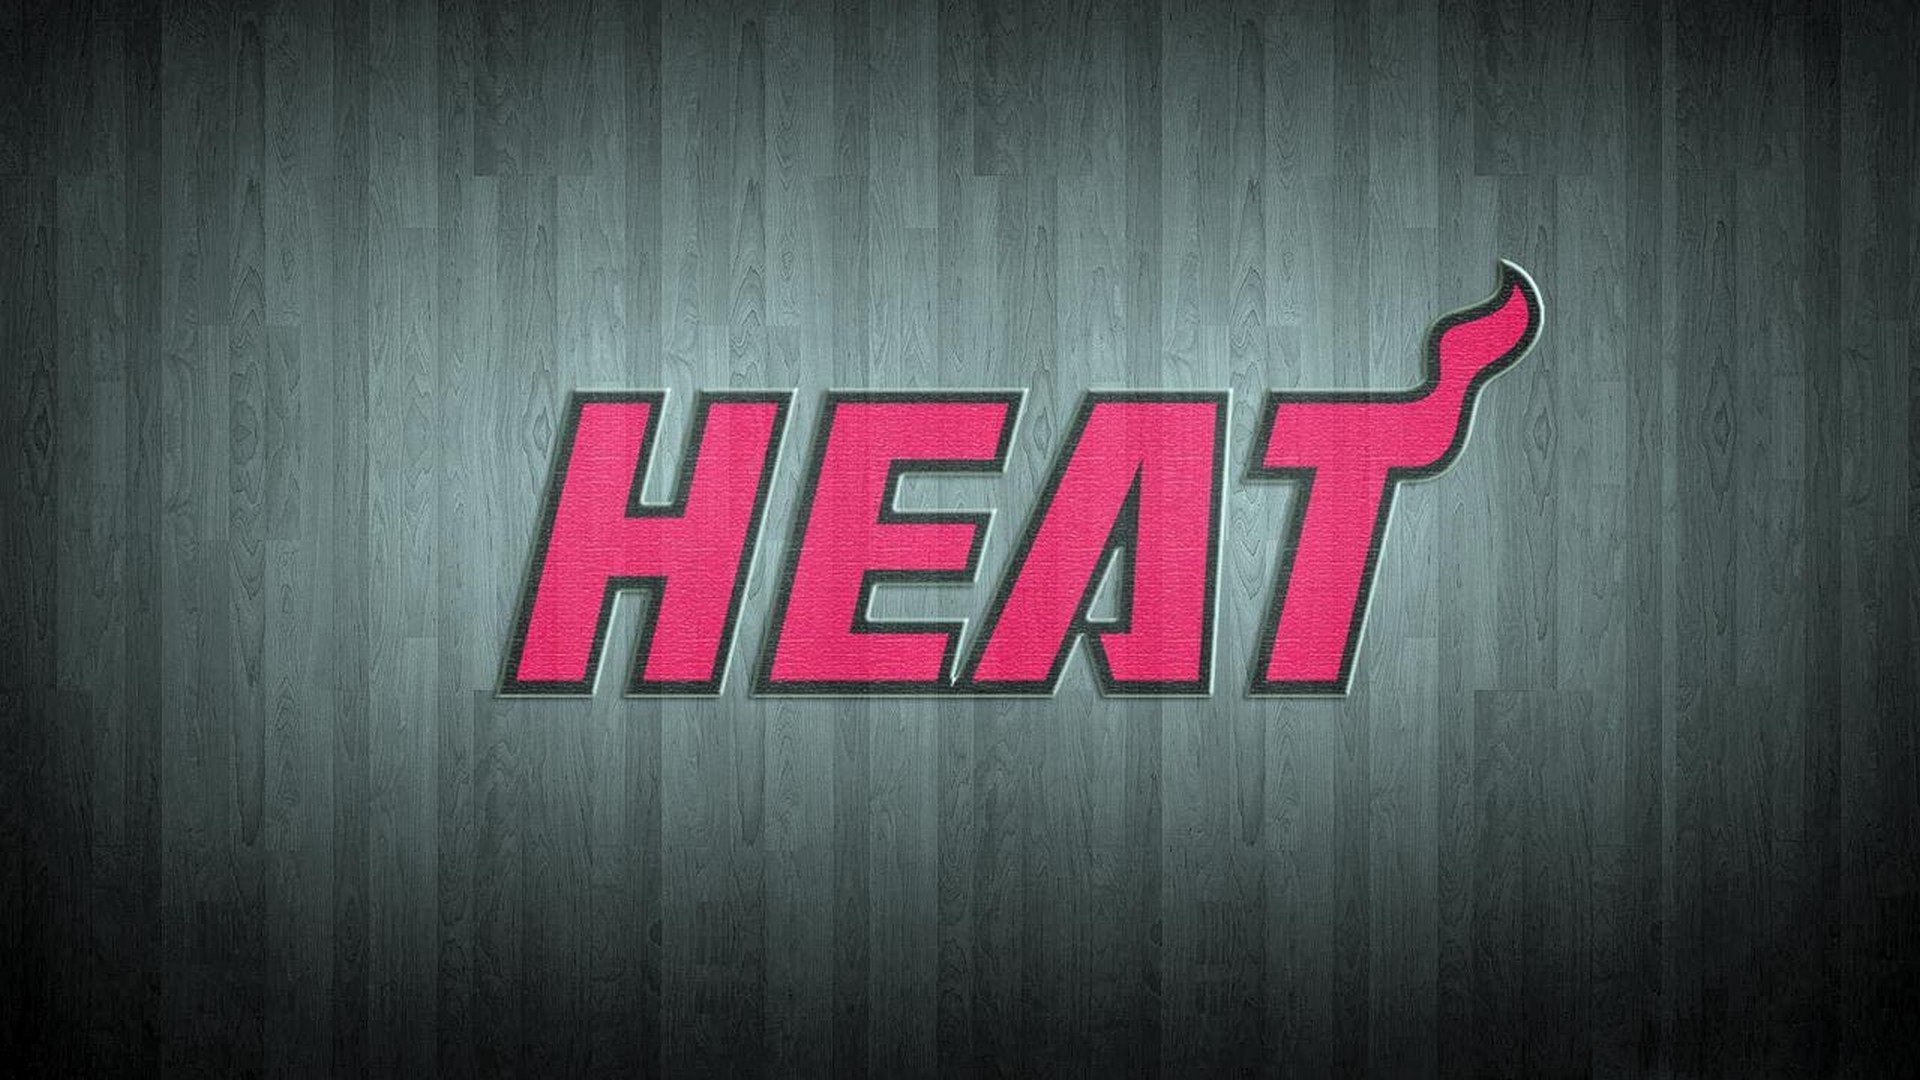 Miami Heat Backgrounds HD With high-resolution 1920X1080 pixel. You can use this wallpaper for your Desktop Computer Backgrounds, Windows or Mac Screensavers, iPhone Lock screen, Tablet or Android and another Mobile Phone device